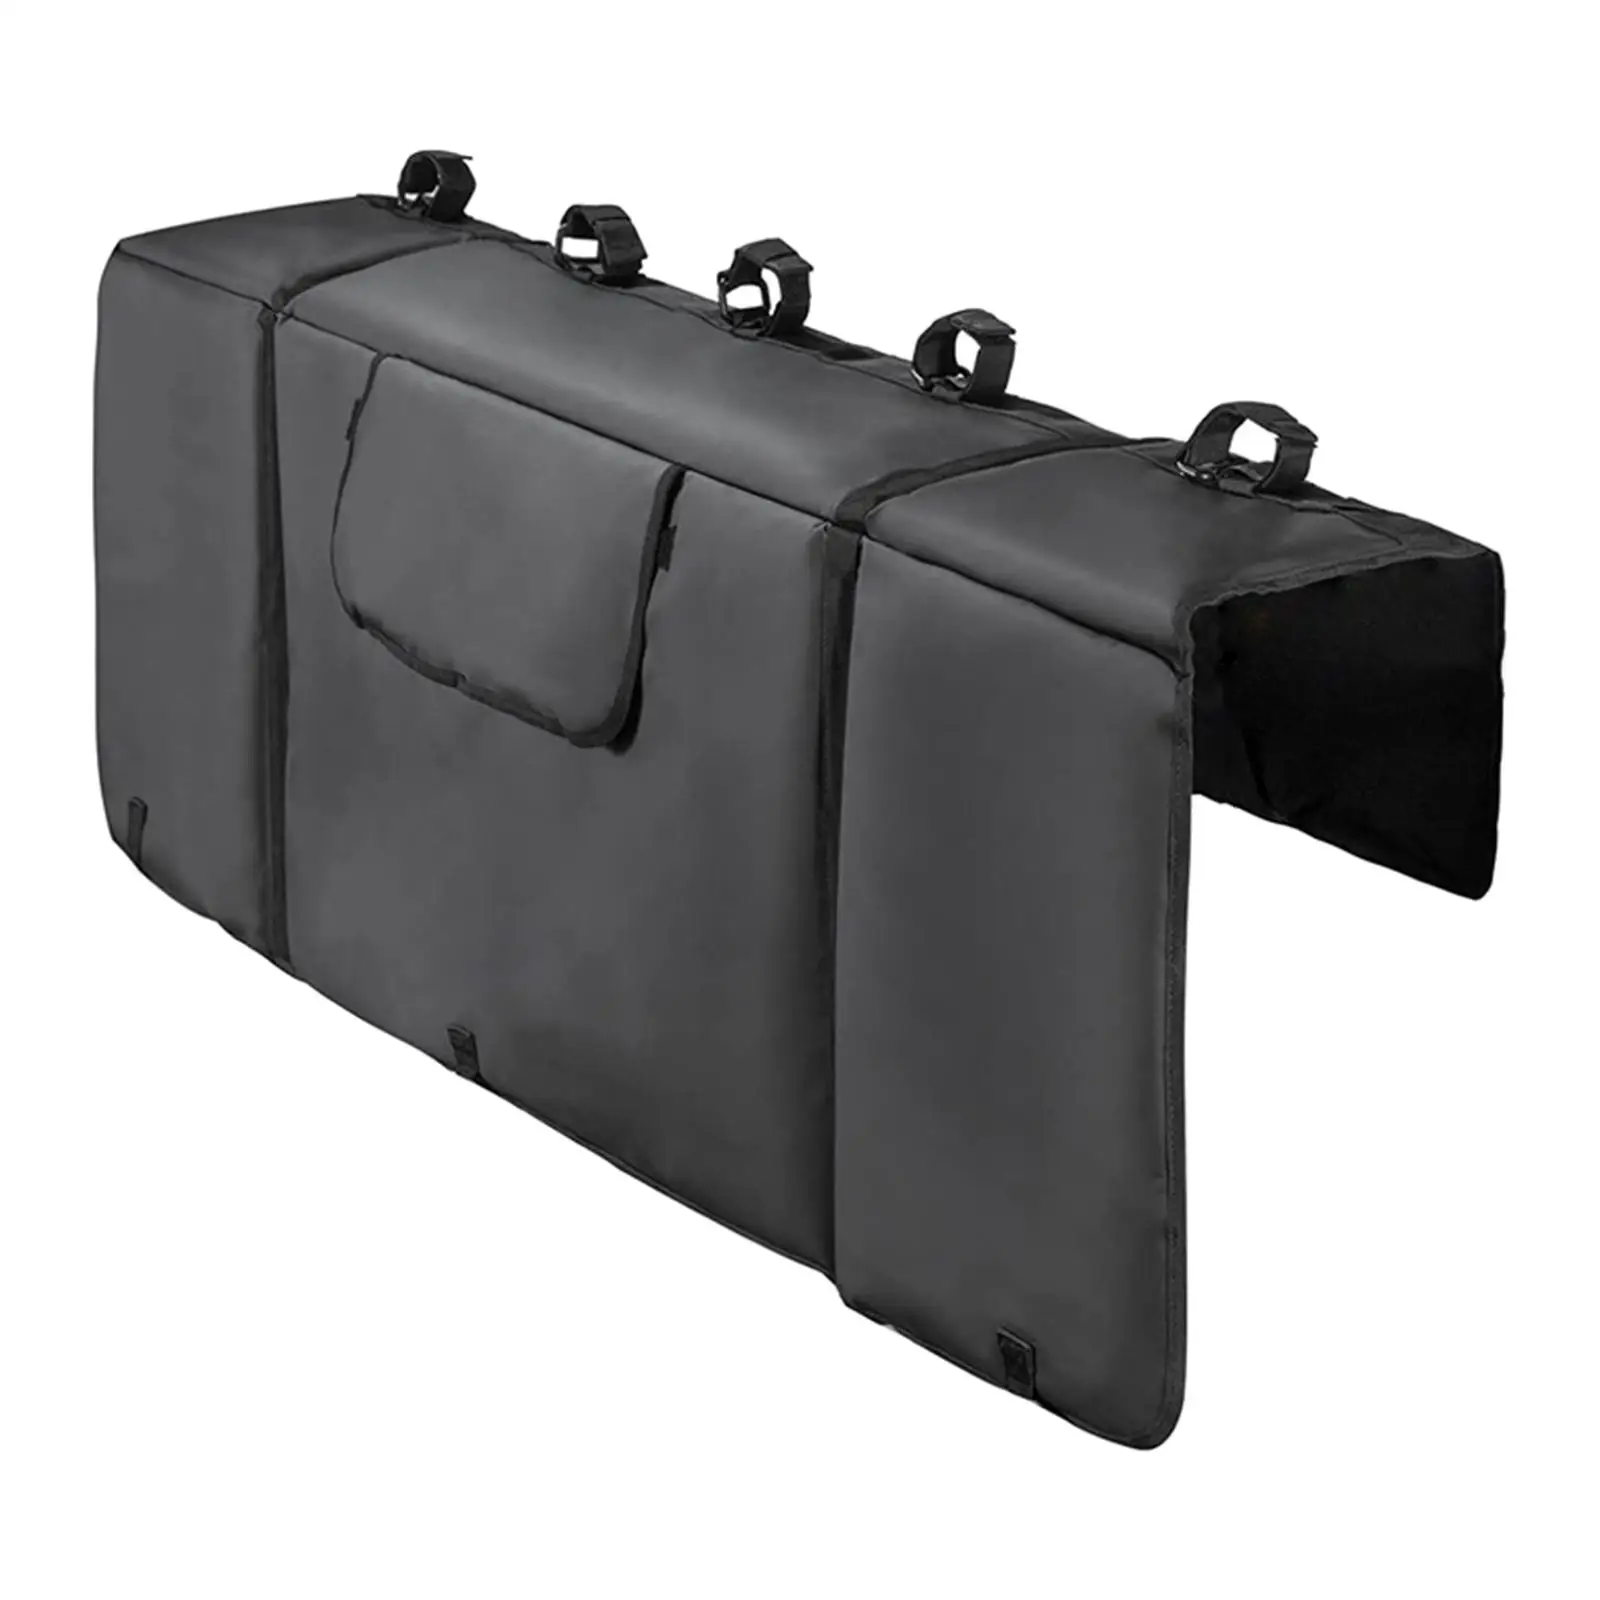 Tailgate Pad for Mountain Bikes, Tailgate Protection Pad for Most Trunks